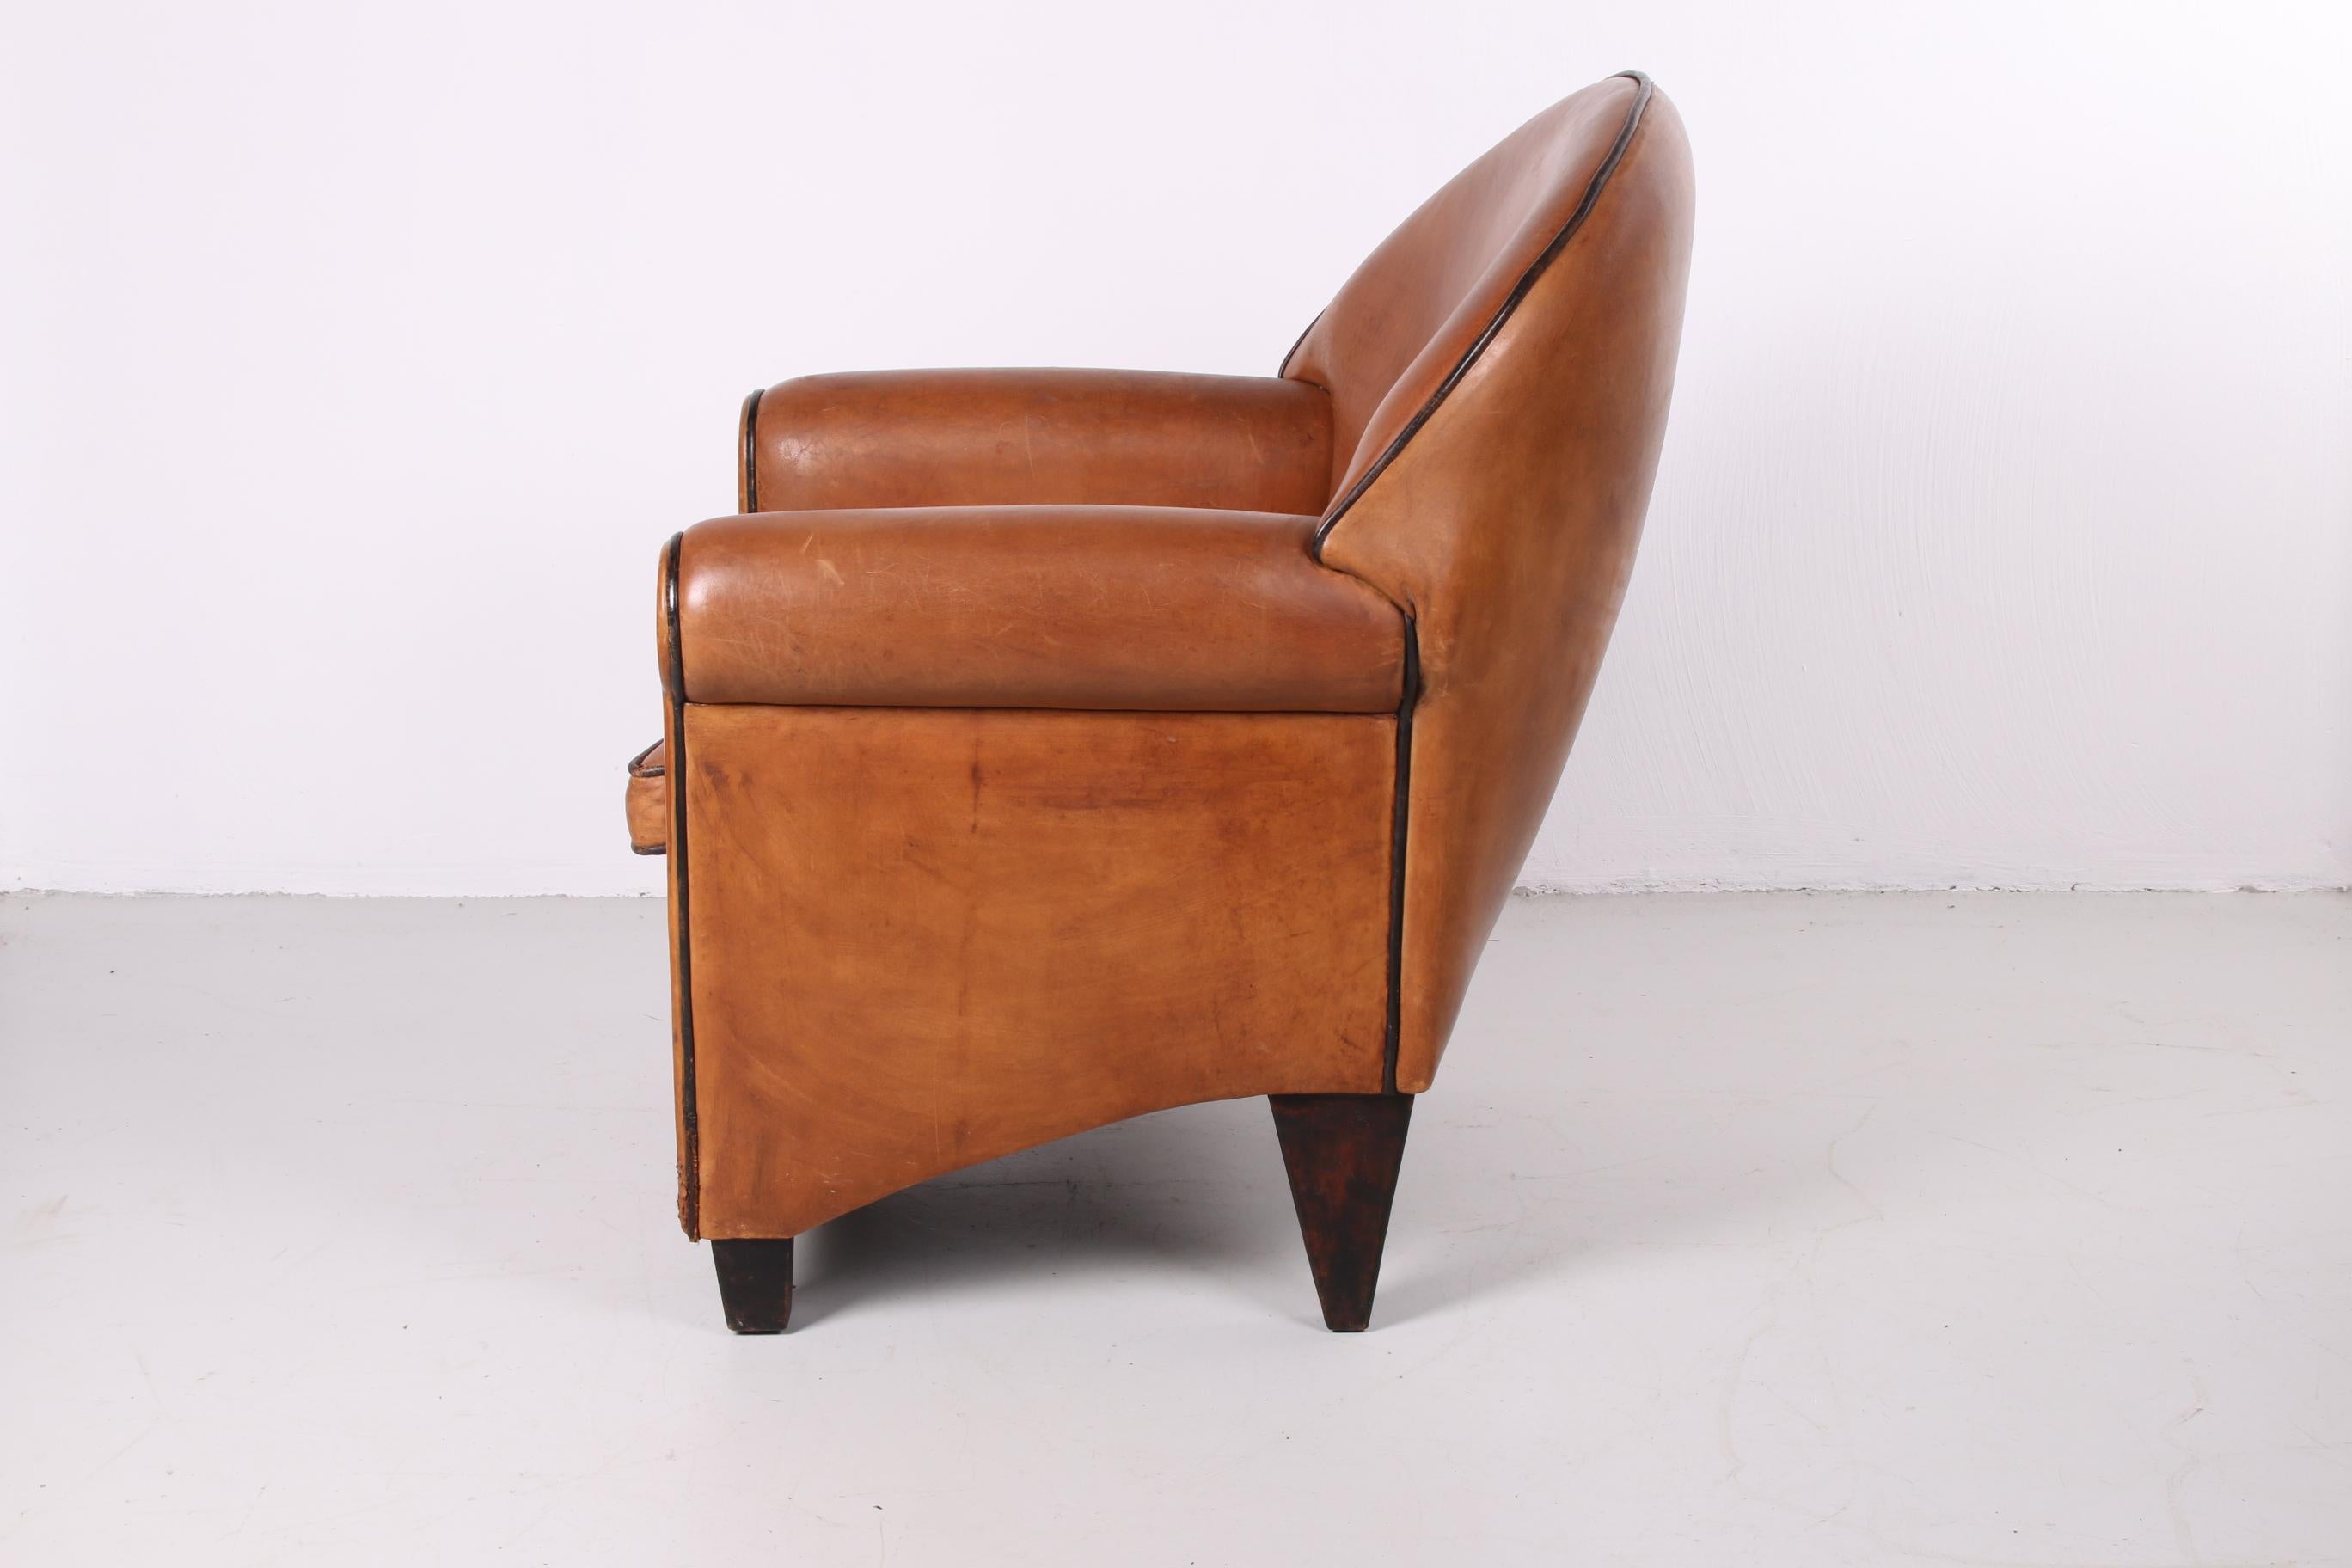 This is a beautiful super quality leather armchair. Design by Bart Van Bekhoven. Made around the 1970s in the Netherlands.

Beautiful, sturdy sheepskin leather has been used, and the models by this designer are exceptionally beautiful. He also